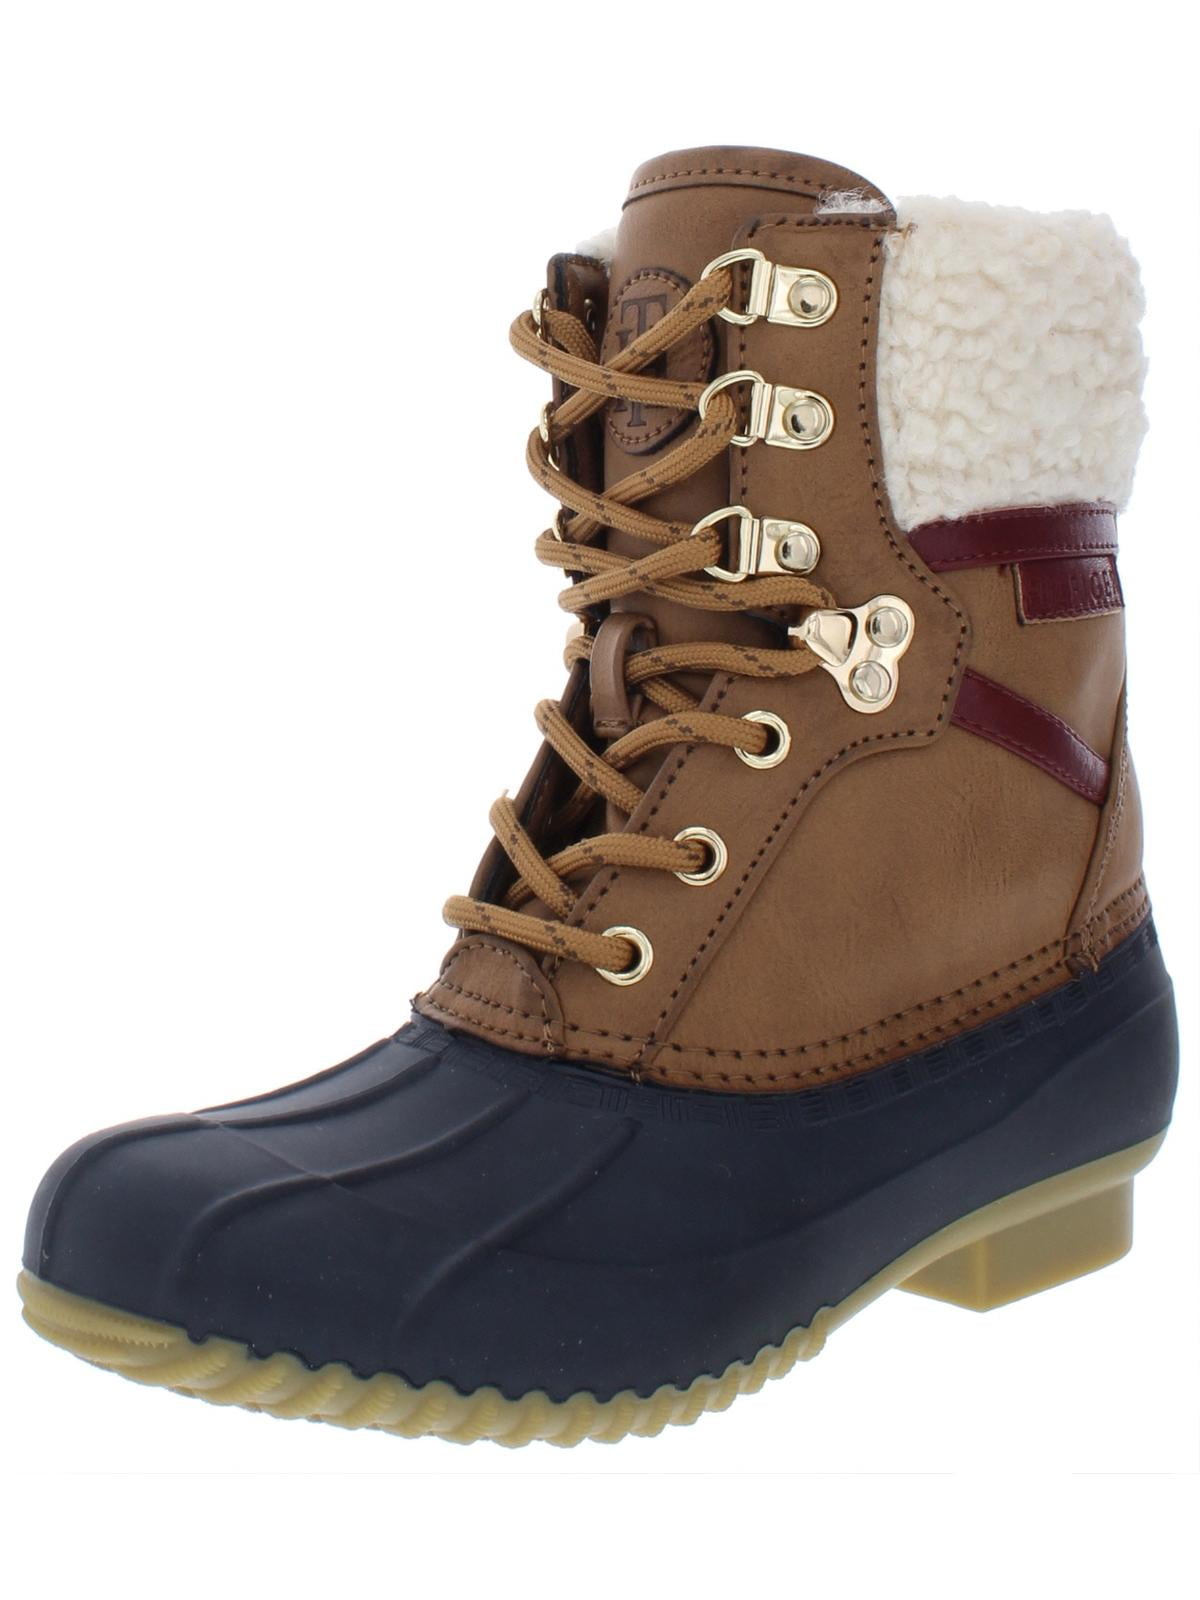 marts humor tørst Tommy Hilfiger Womens Rian Faux Leather Ankle Rain Boots - Walmart.com